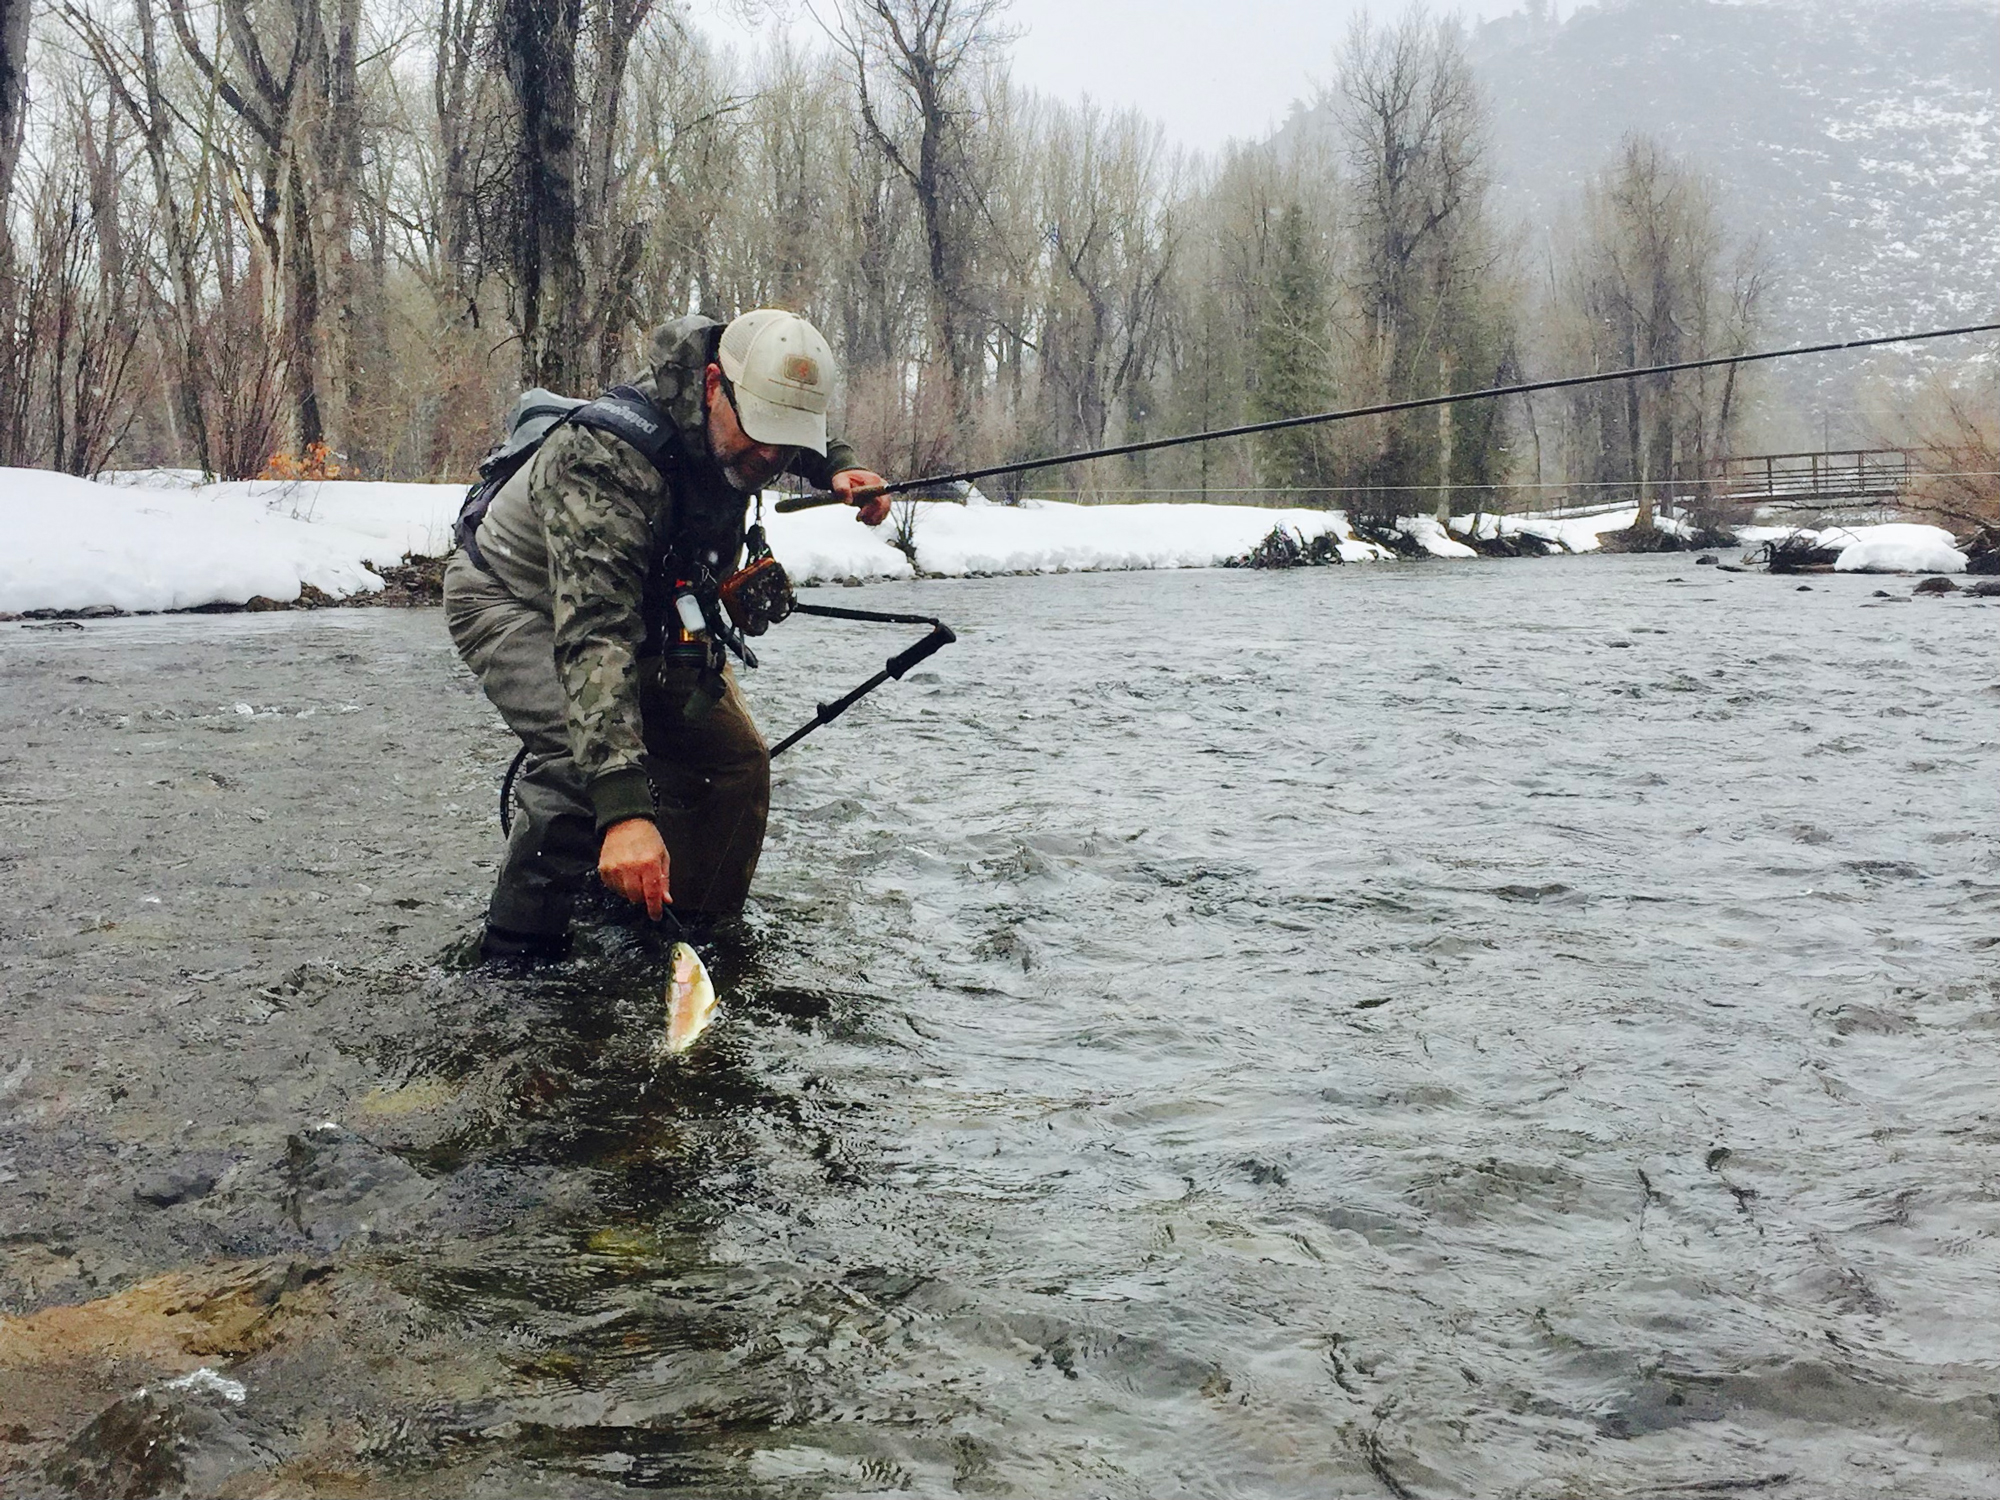 Angler fishing during the winter holding his rod and fish